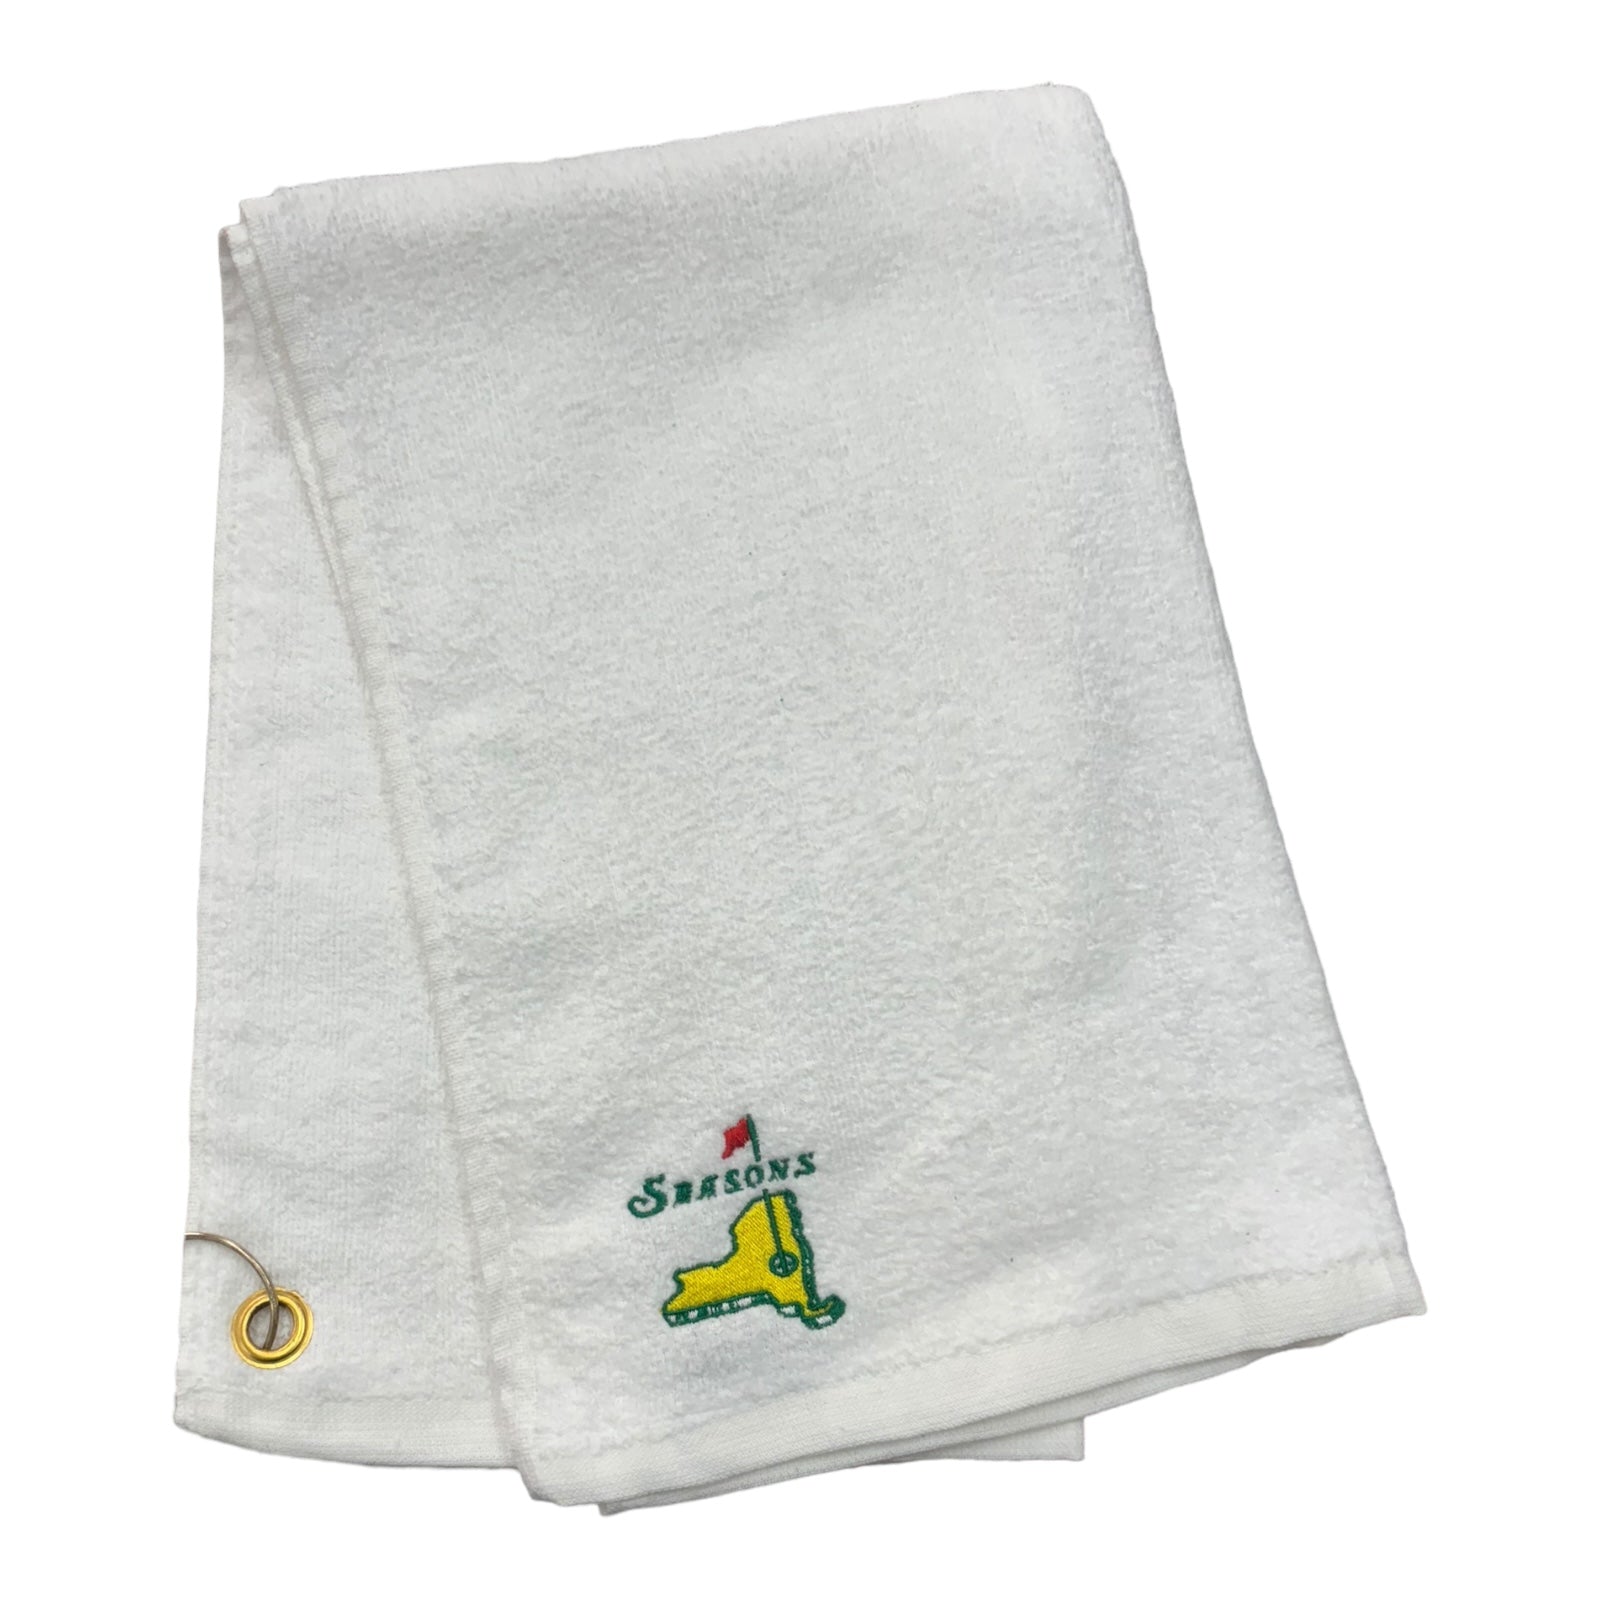 White Golf Towel with Embroidered NYS Logo Embroidered on it.